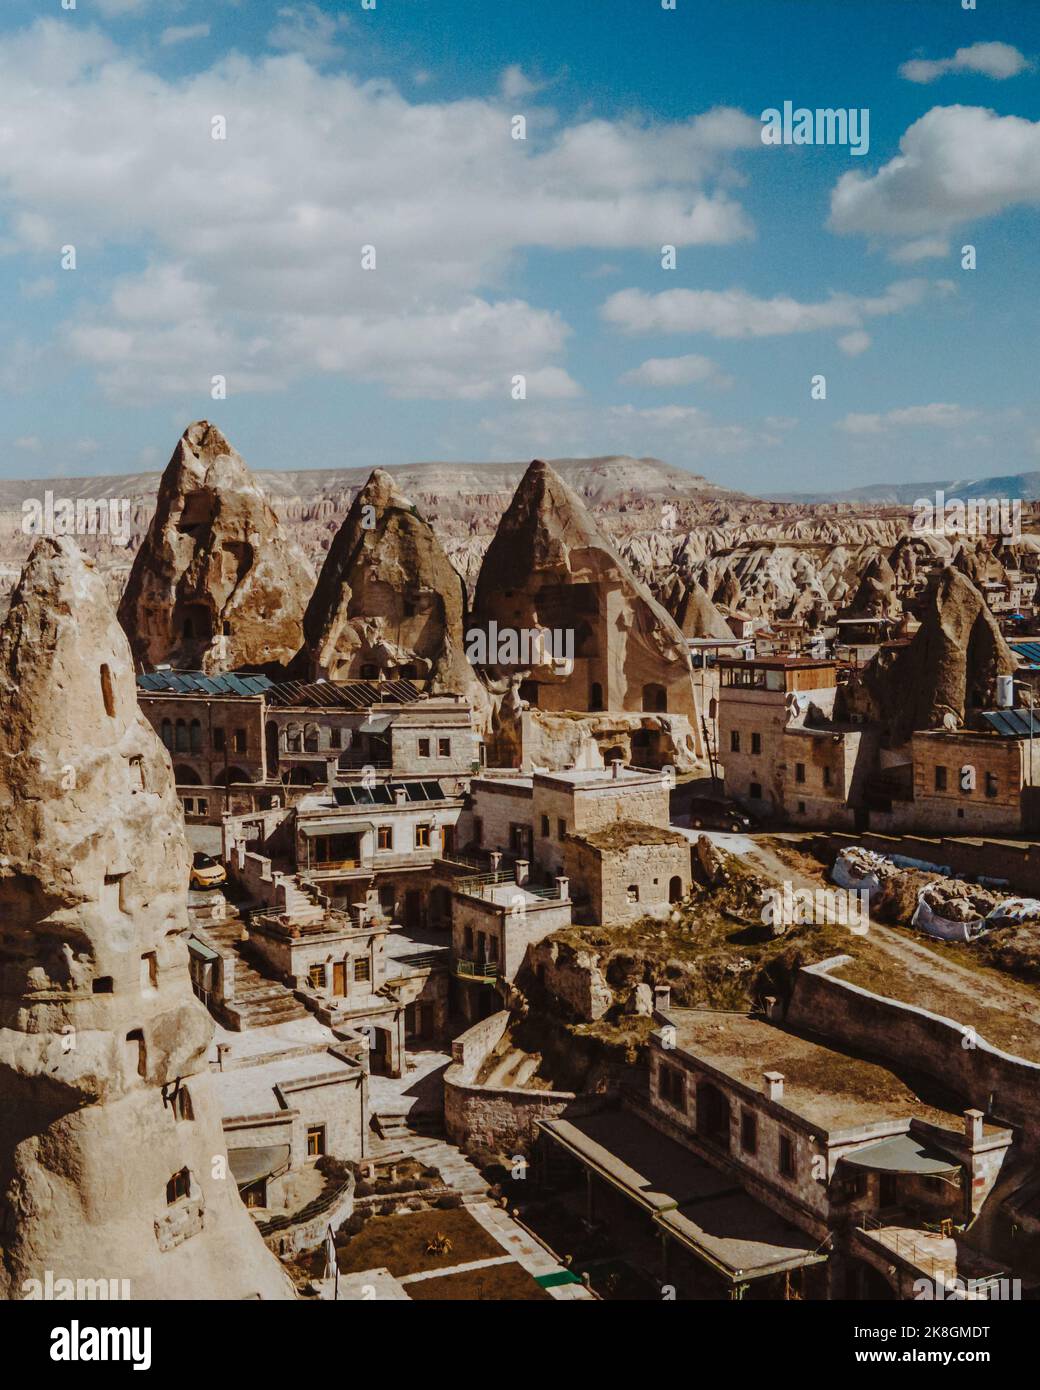 Amazing scenery of massive fairy chimneys and traditional aged houses located in mountainous valley against cloudy blue sky on sunny day in Cappadocia Stock Photo